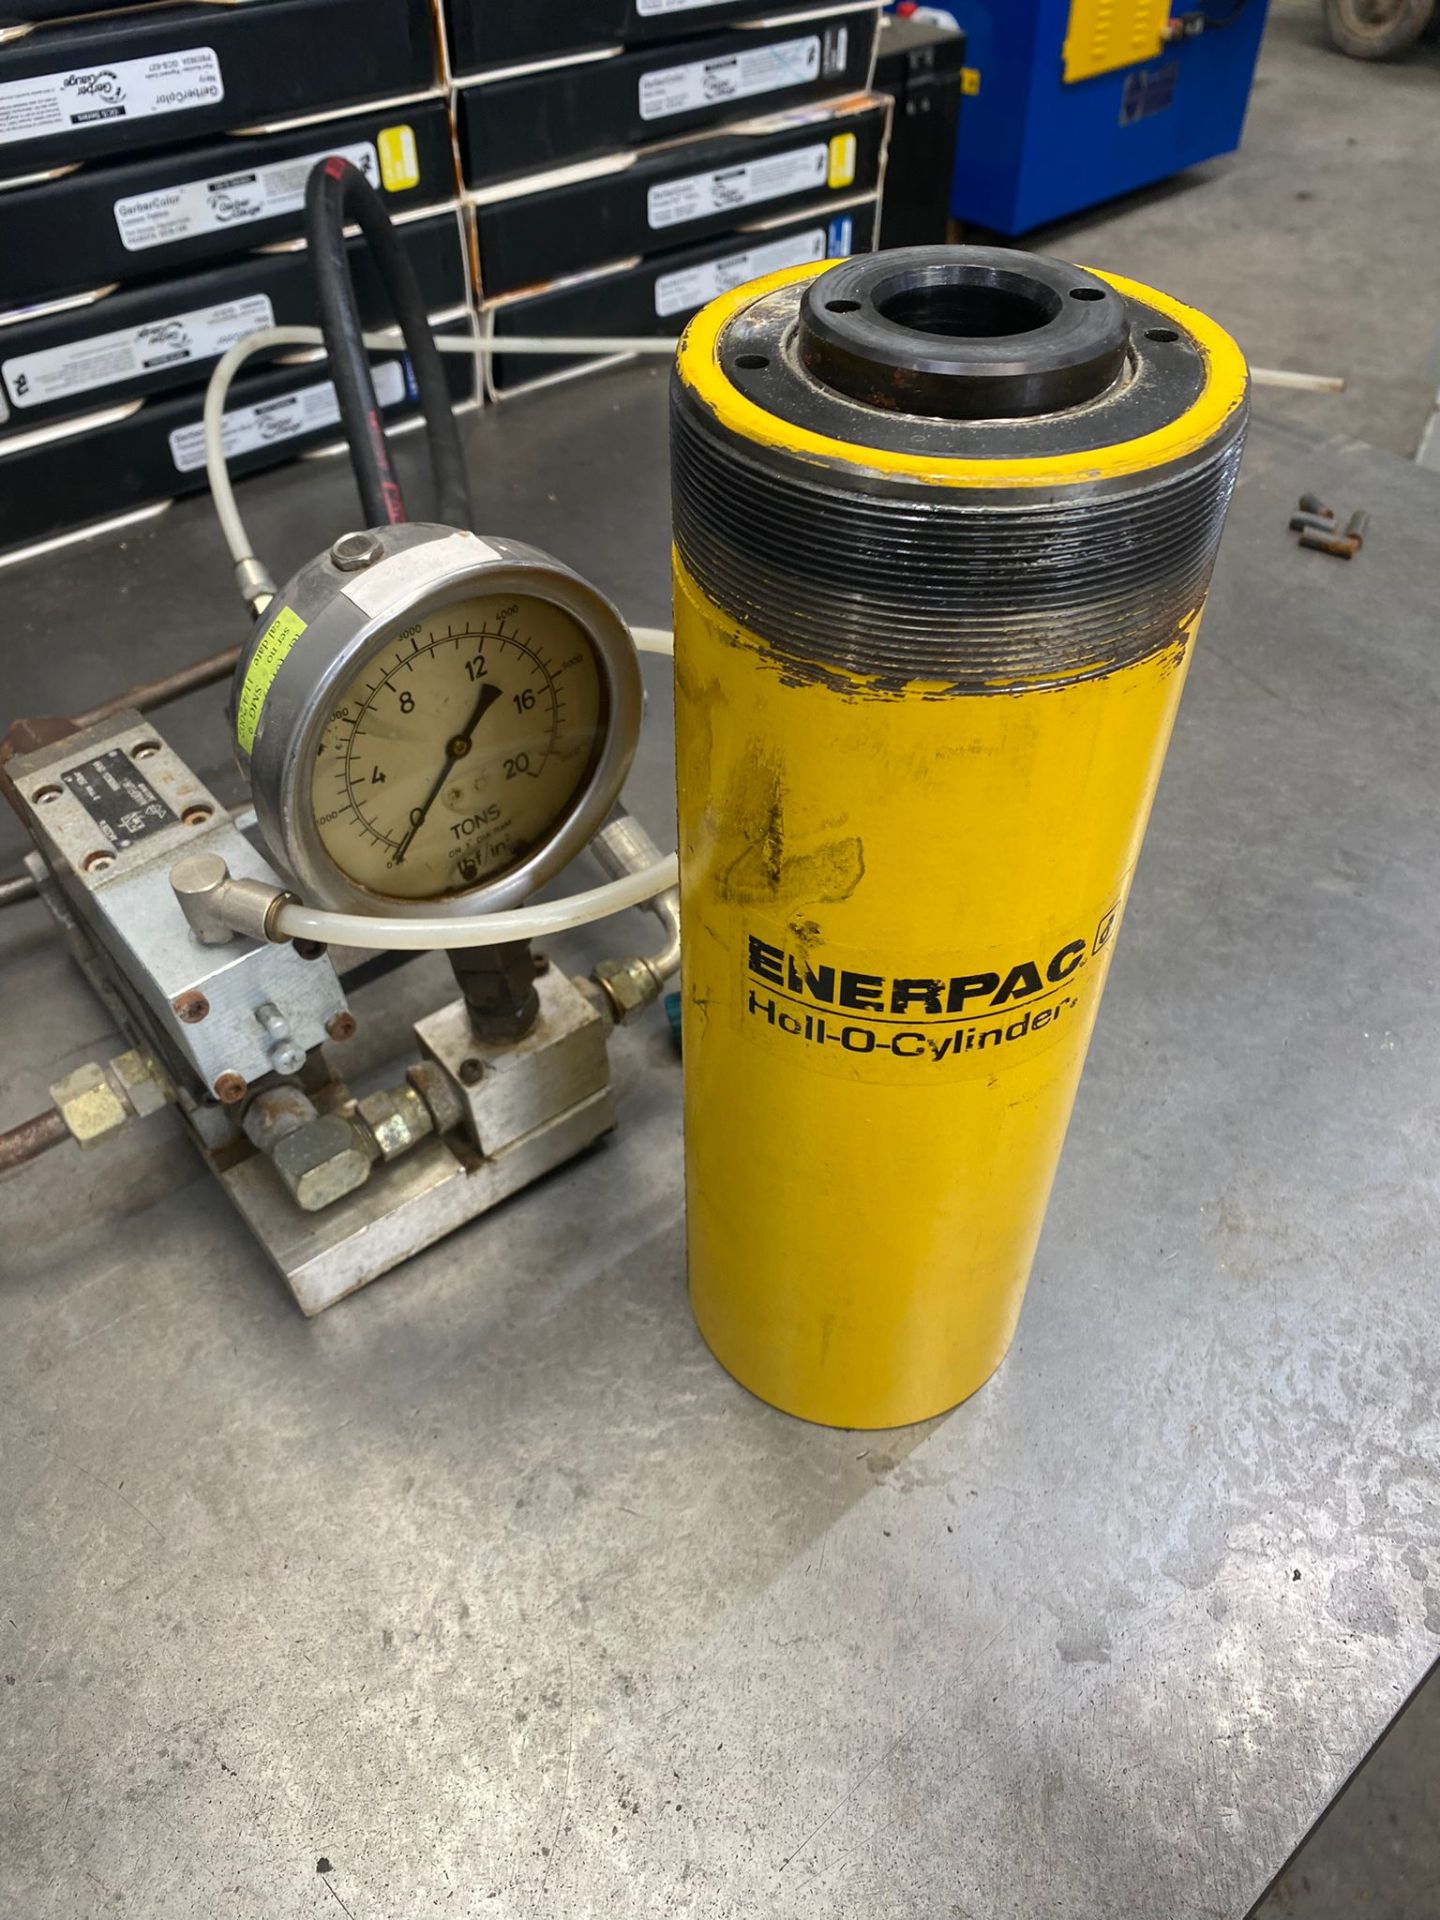 Three Enerpac RCH306 Hydraulic Cylinders, with controller, 30 tonne cap, loading free of charge - - Image 4 of 6